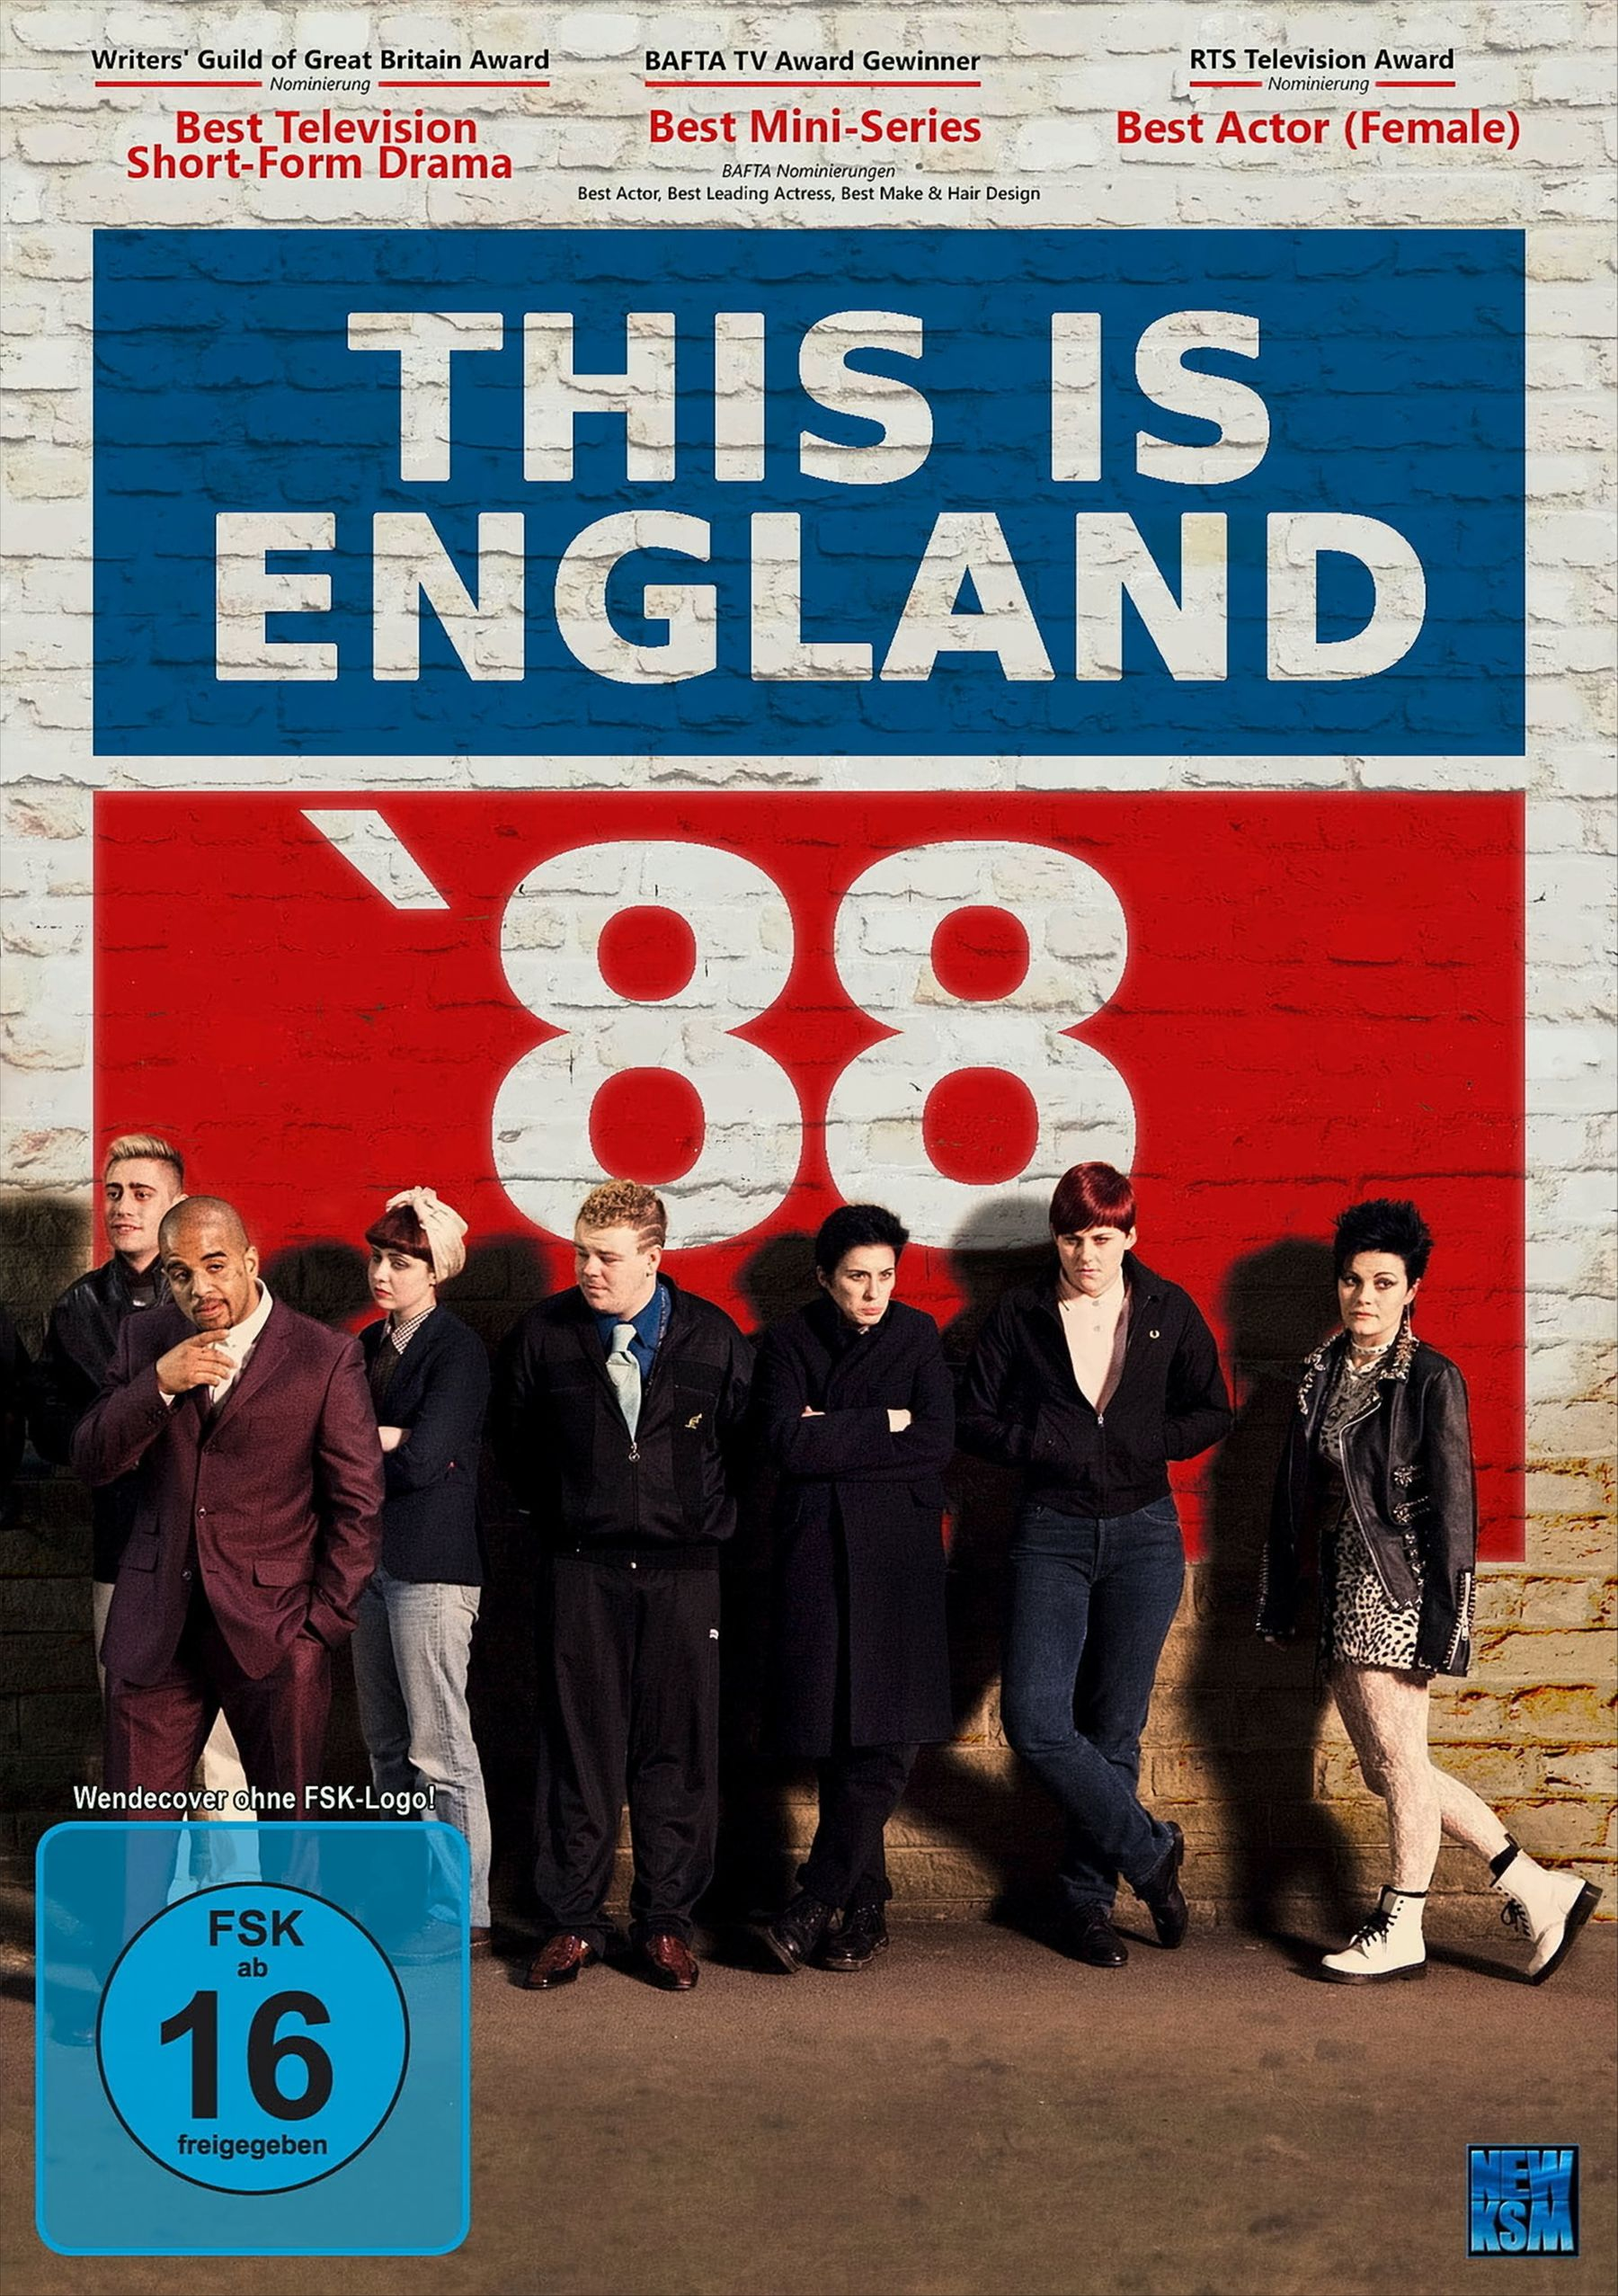 This Is England \'88 DVD